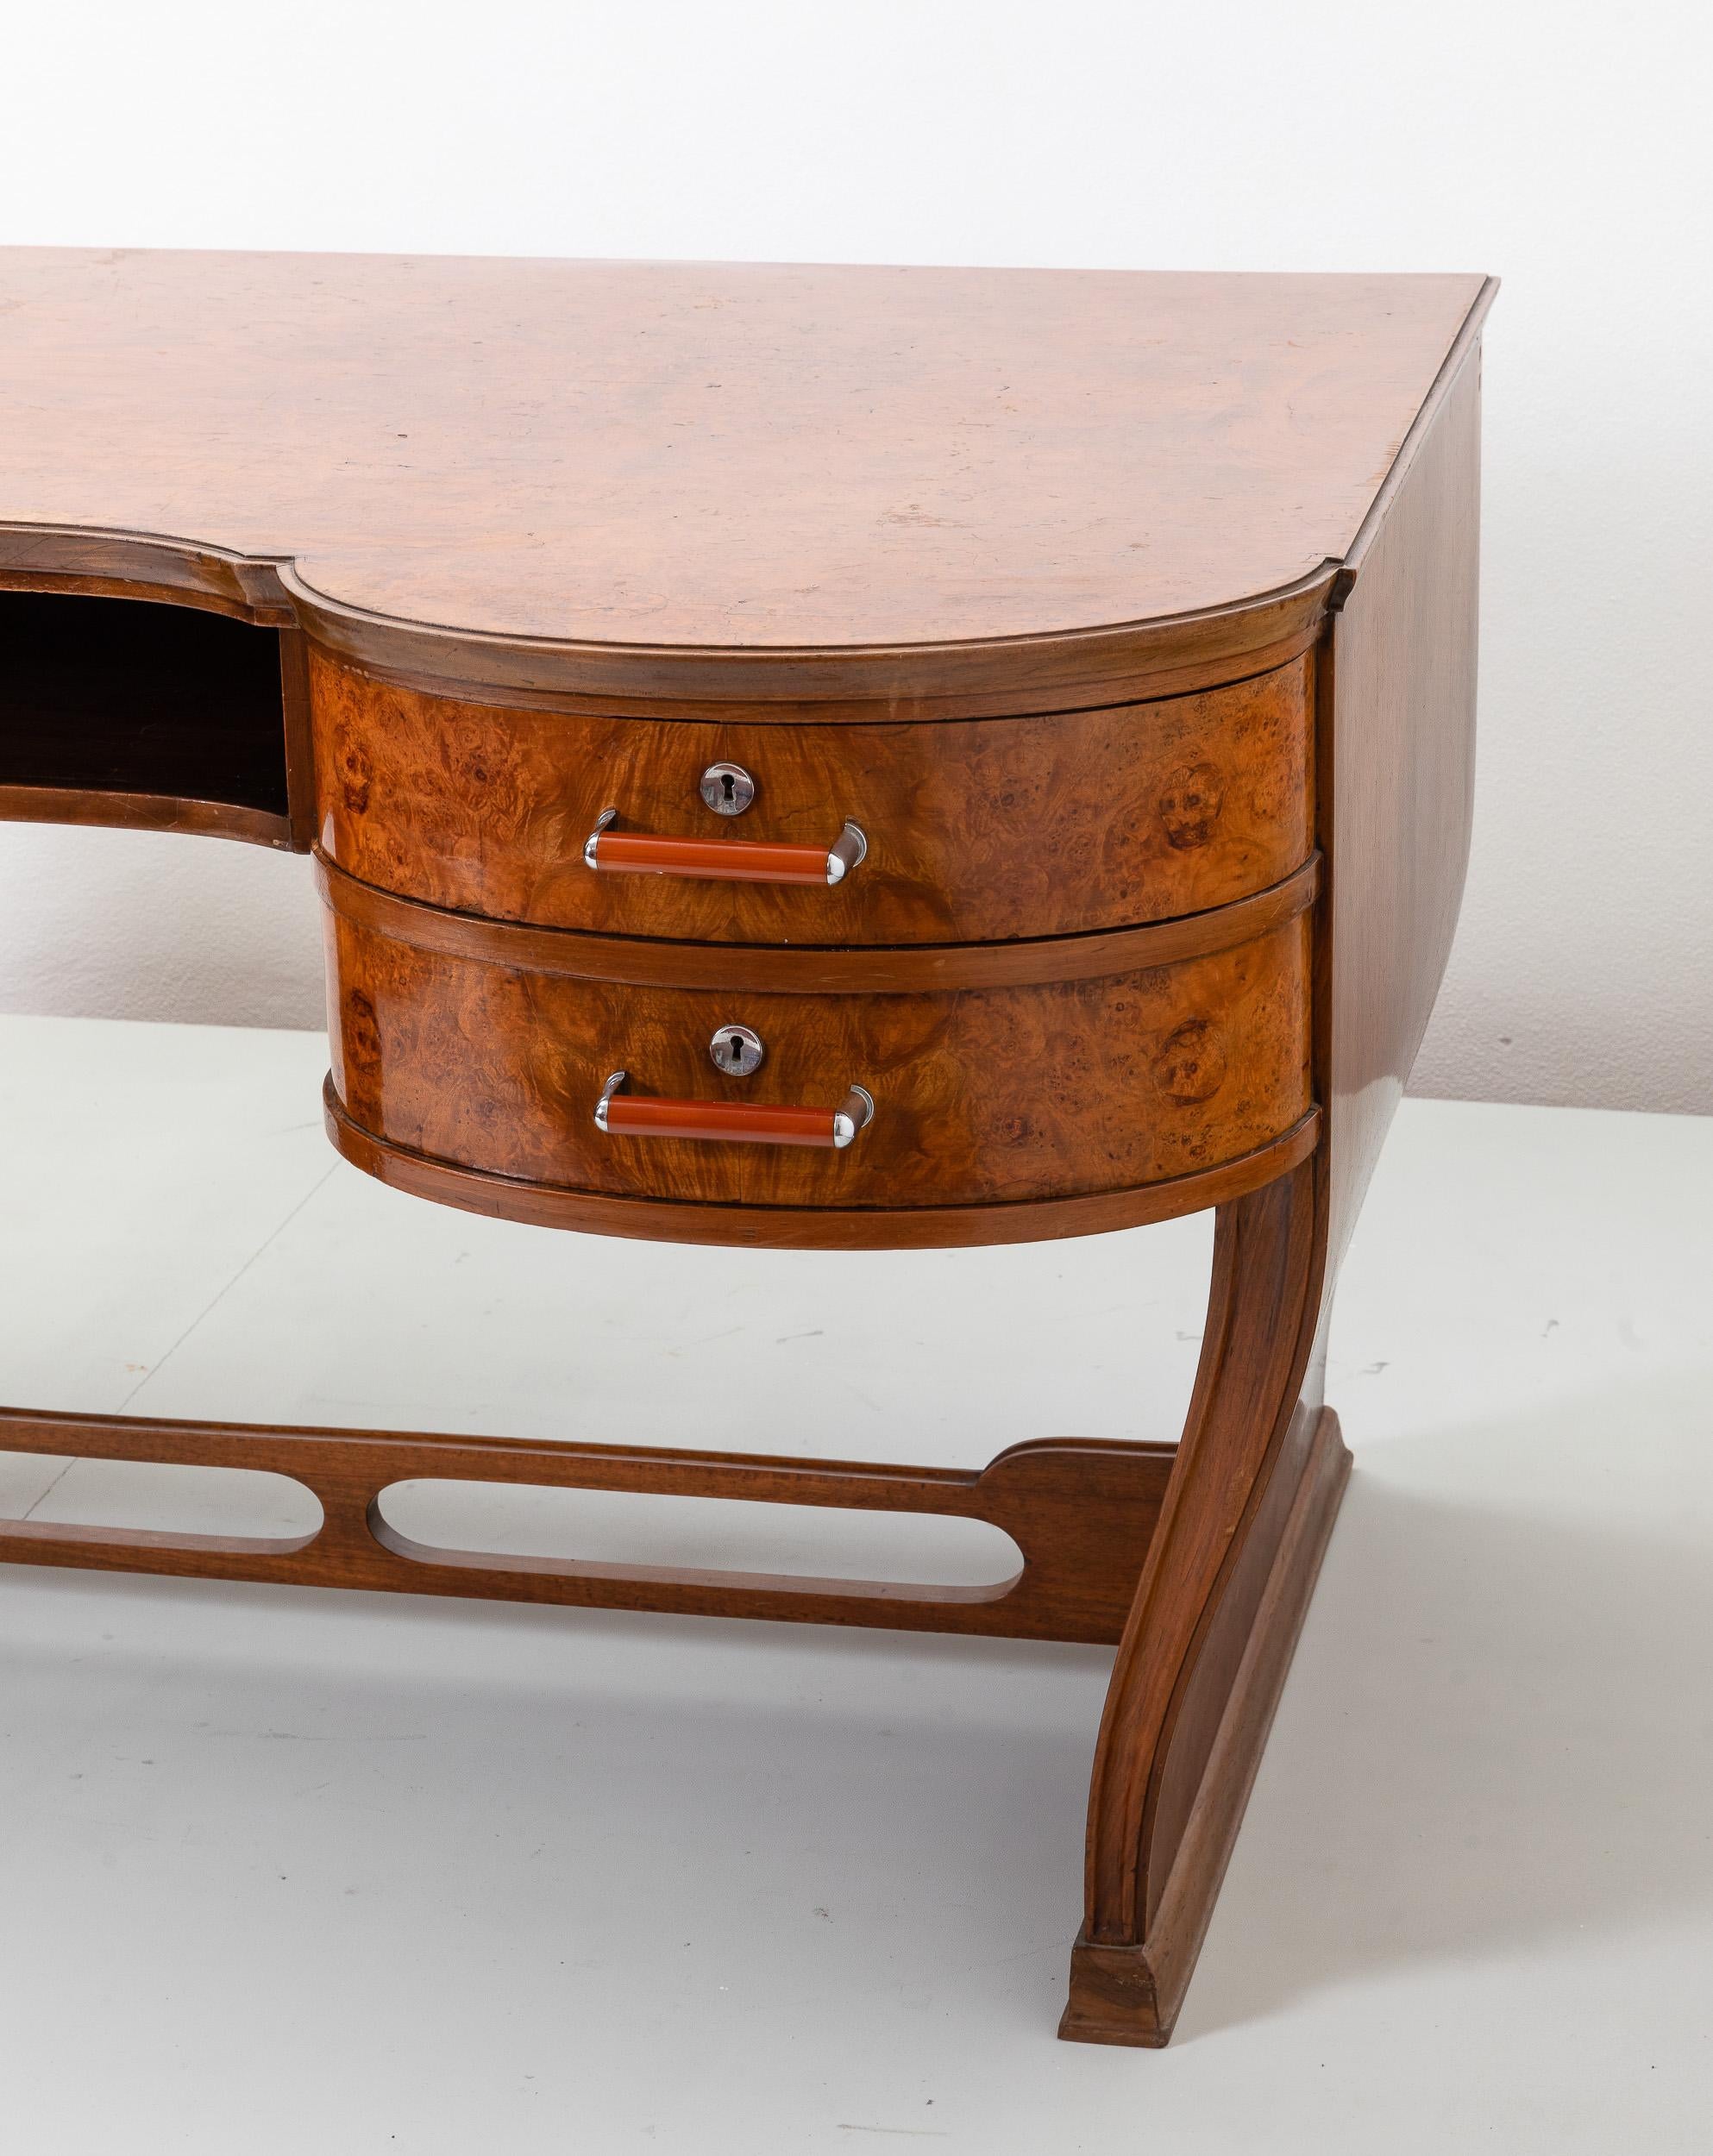 Prod. Italy, c. 1930 Deco desk with curvilinear forms  For Sale 5